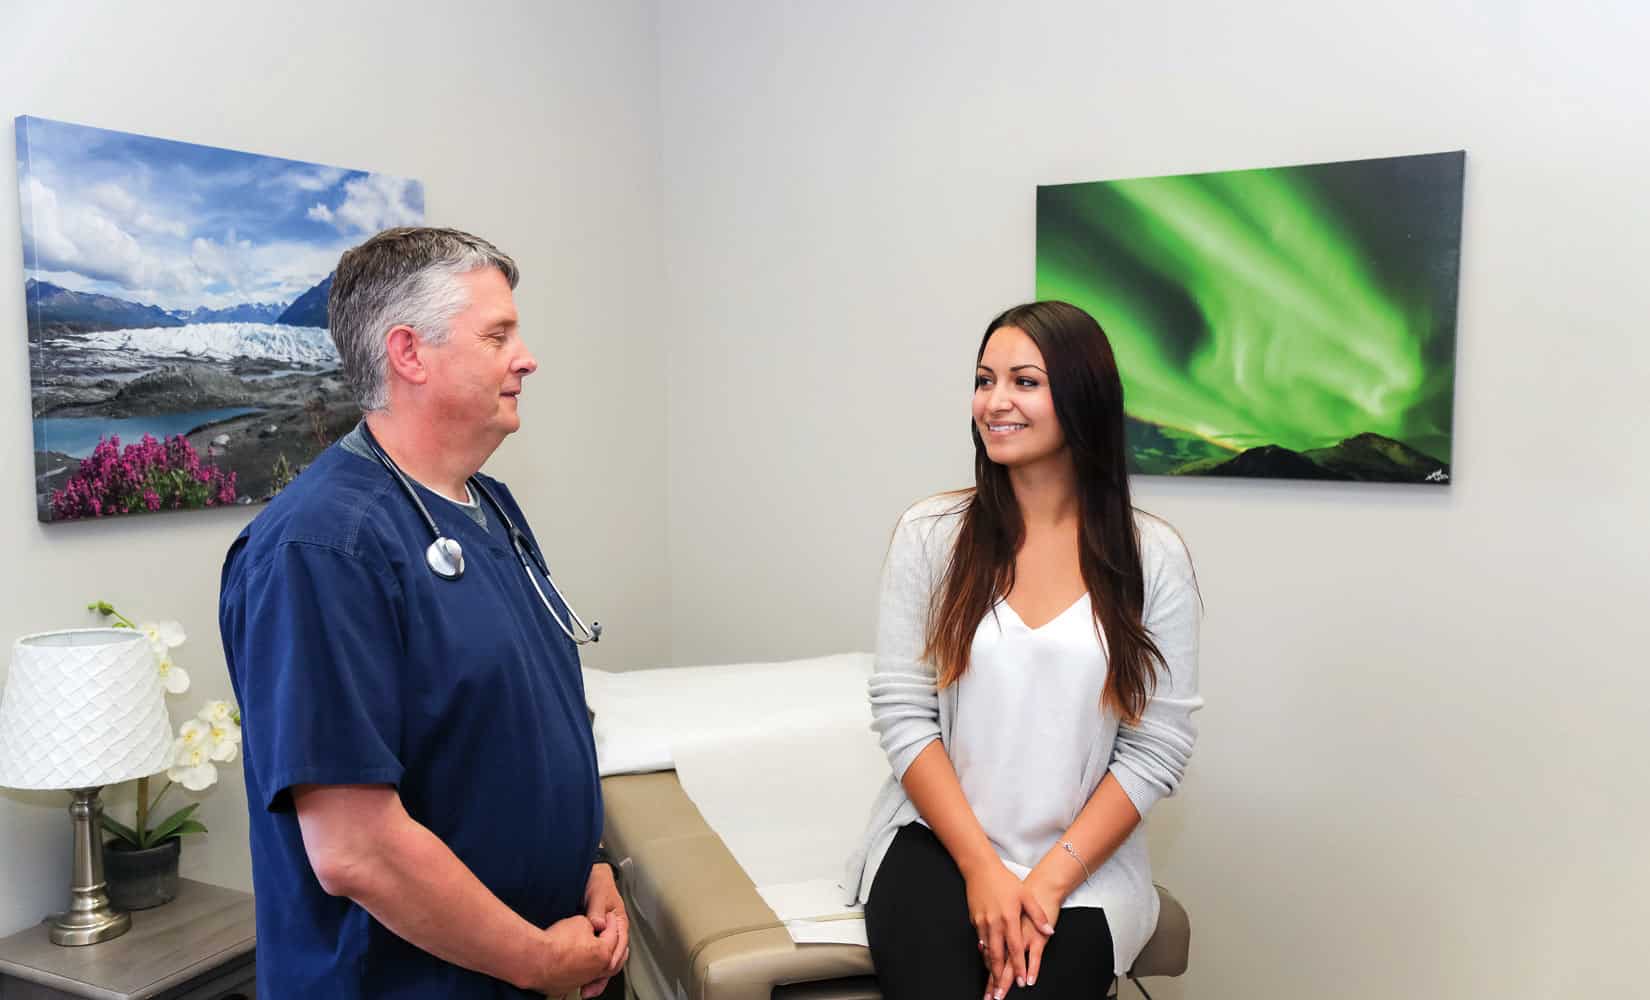 Beacon’s near-site clinics allow organizations to provide medical services to their employees.